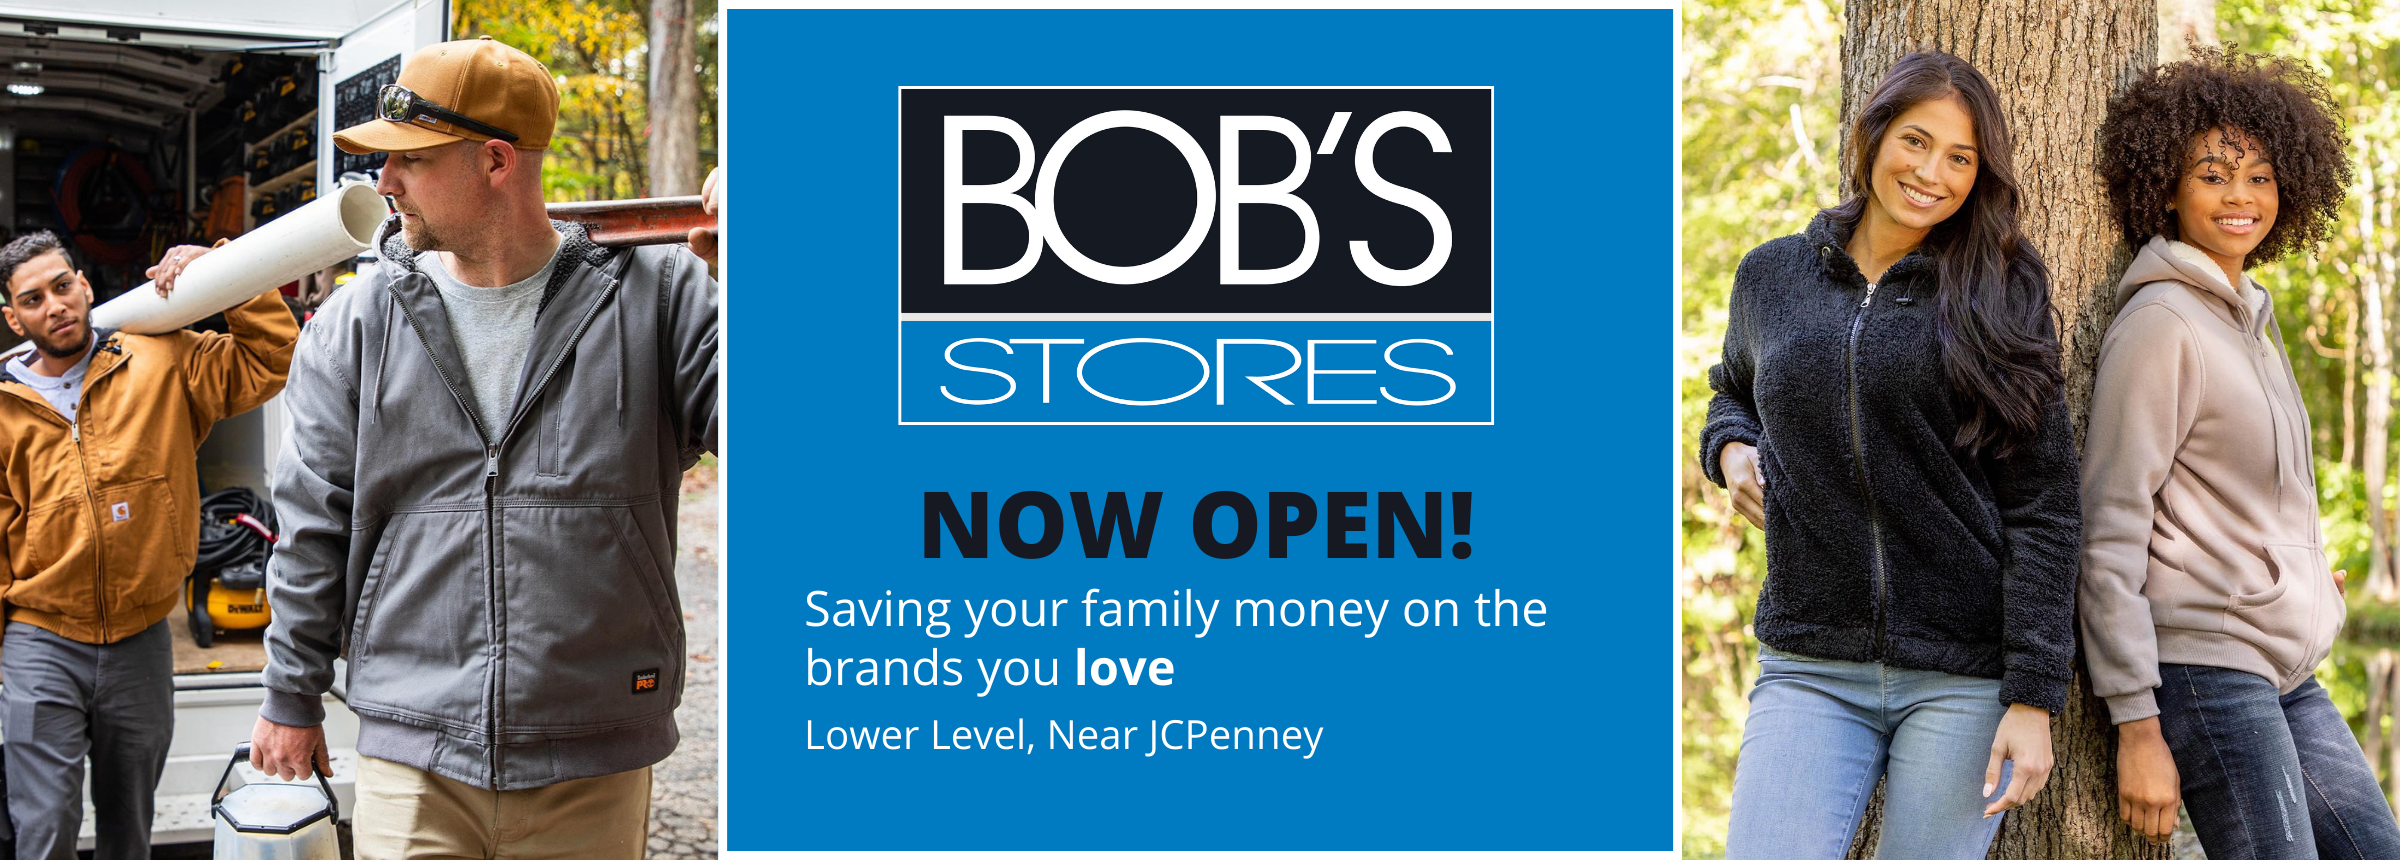 Bobs Stores now open at Holyoke Mallon the lower level near JCPenney